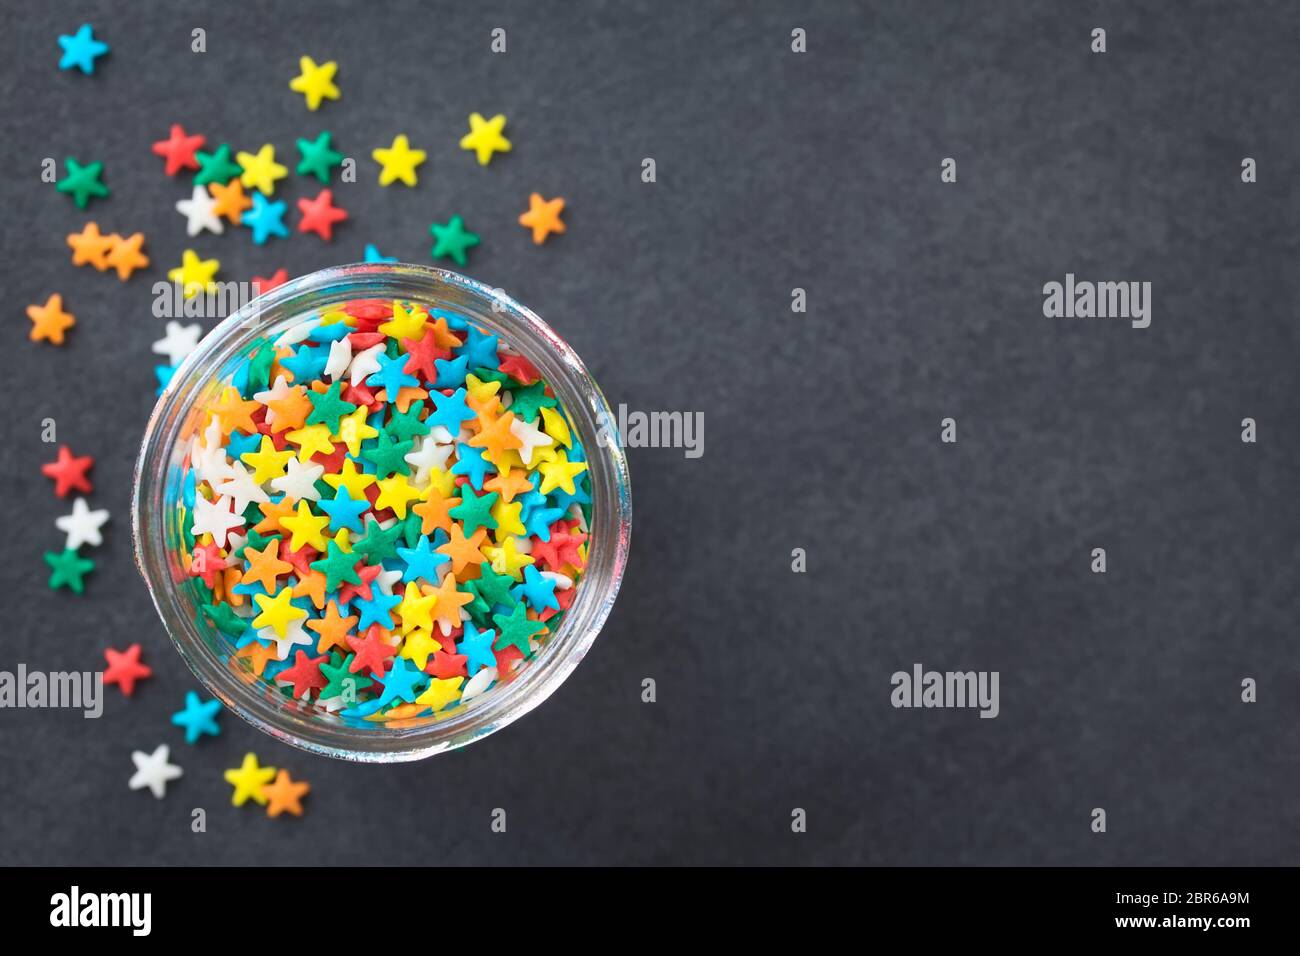 Colorful star shaped sugar sprinkles in glass jar, photographed overhead on slate (Selective Focus, Focus on the sprinkles in the jar) Stock Photo